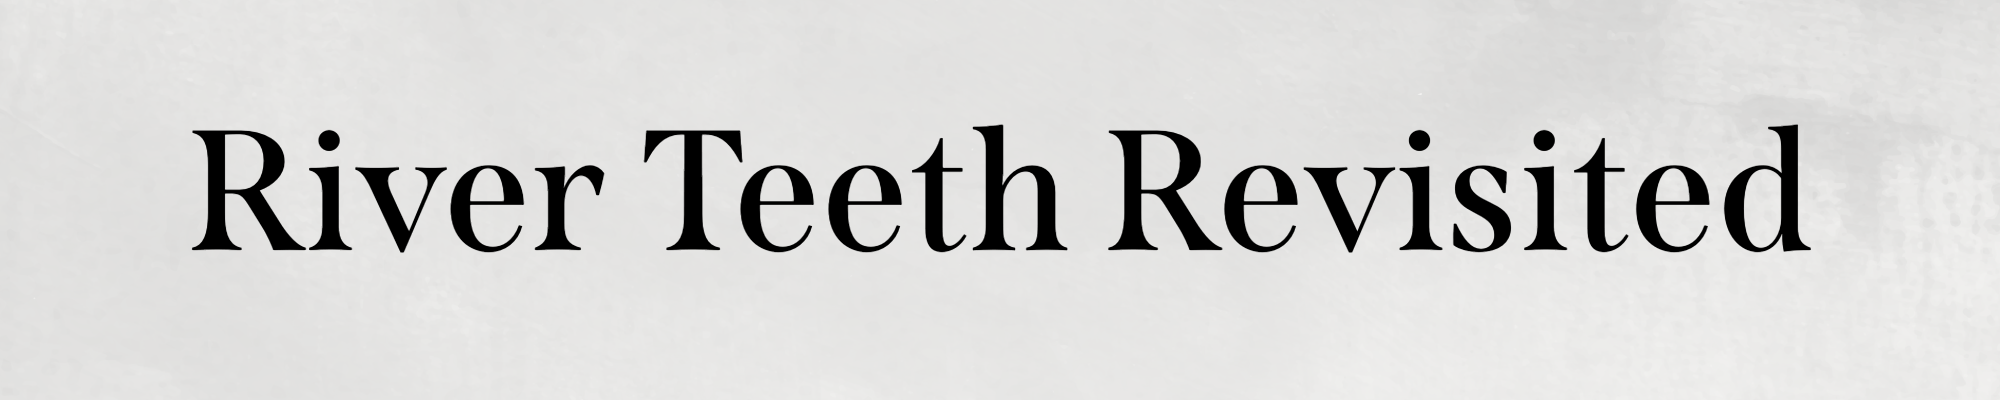 River Teeth Revisted